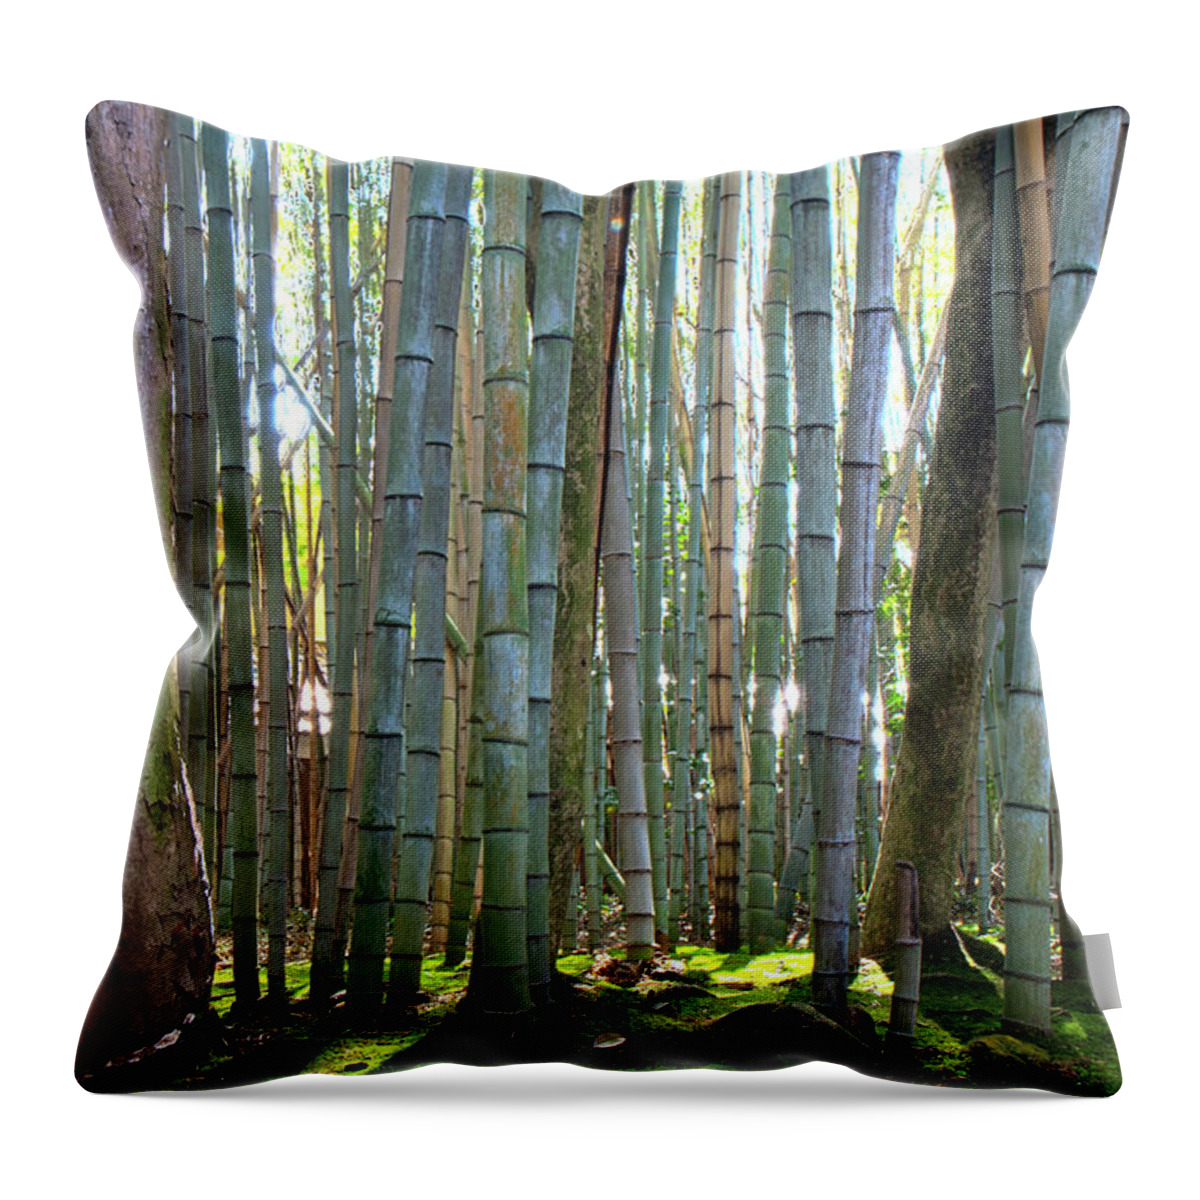 Japan Throw Pillow featuring the photograph Bamboo Forest by Gary Hughes